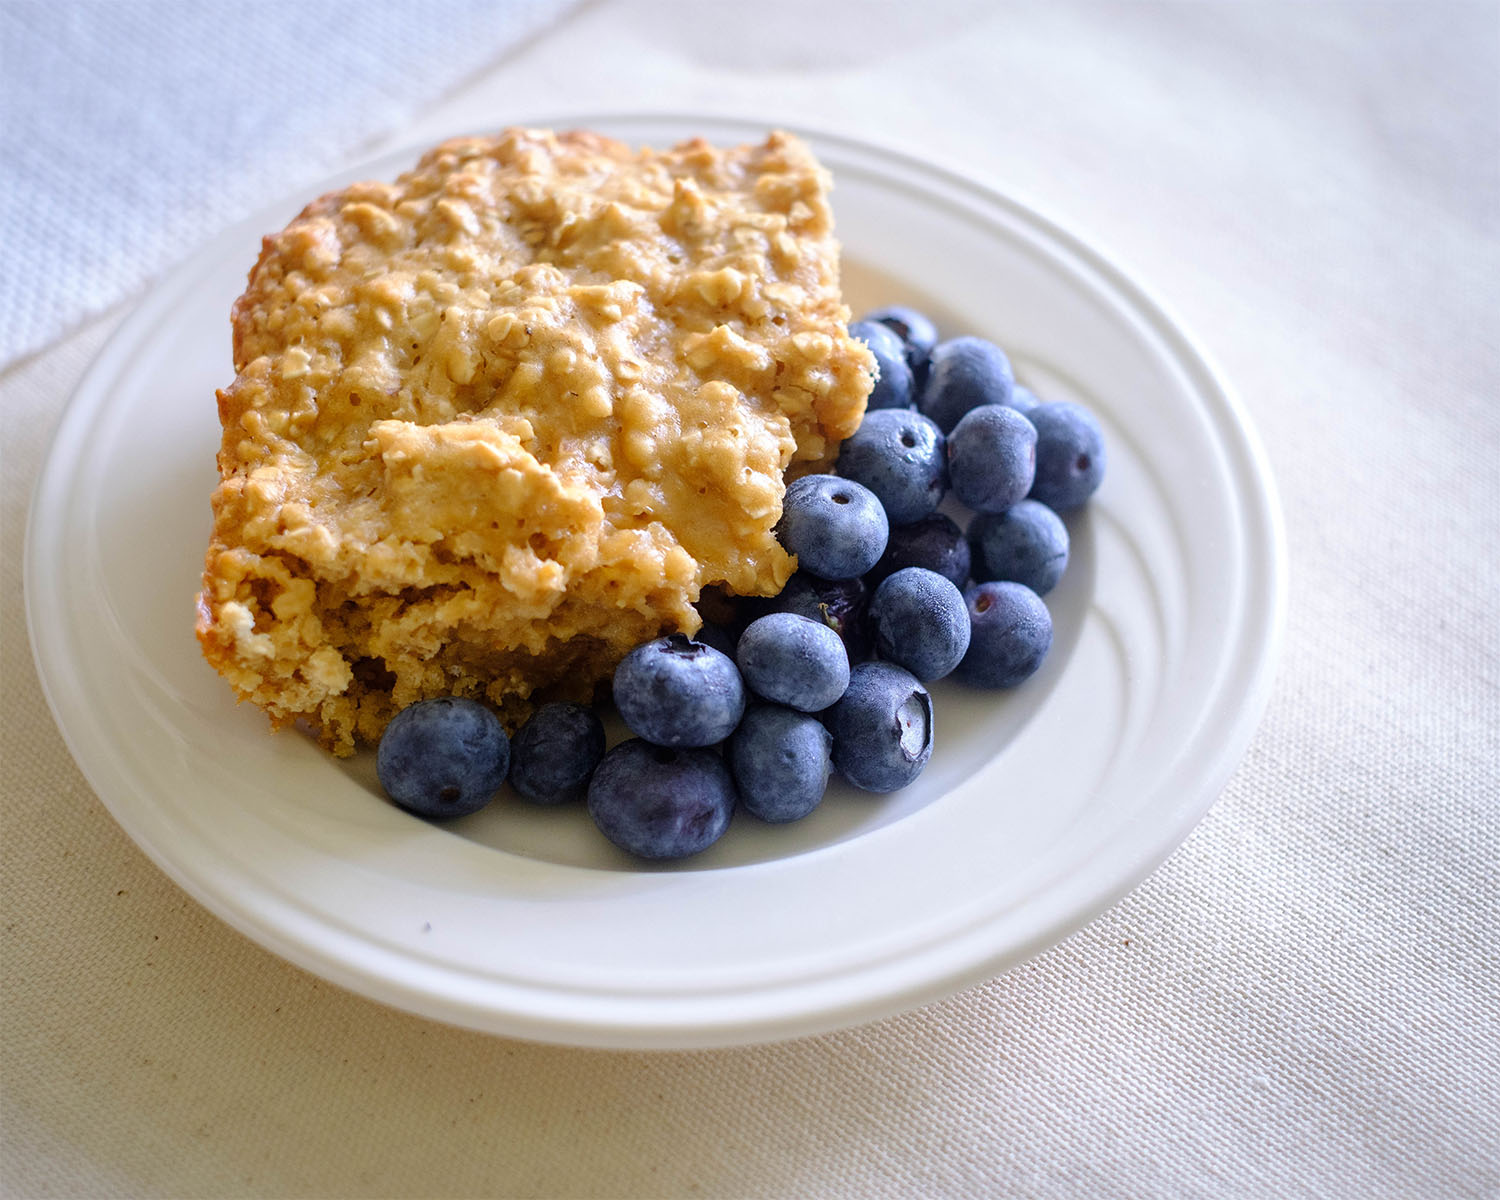 round plate with honey oat muffins and blueberries